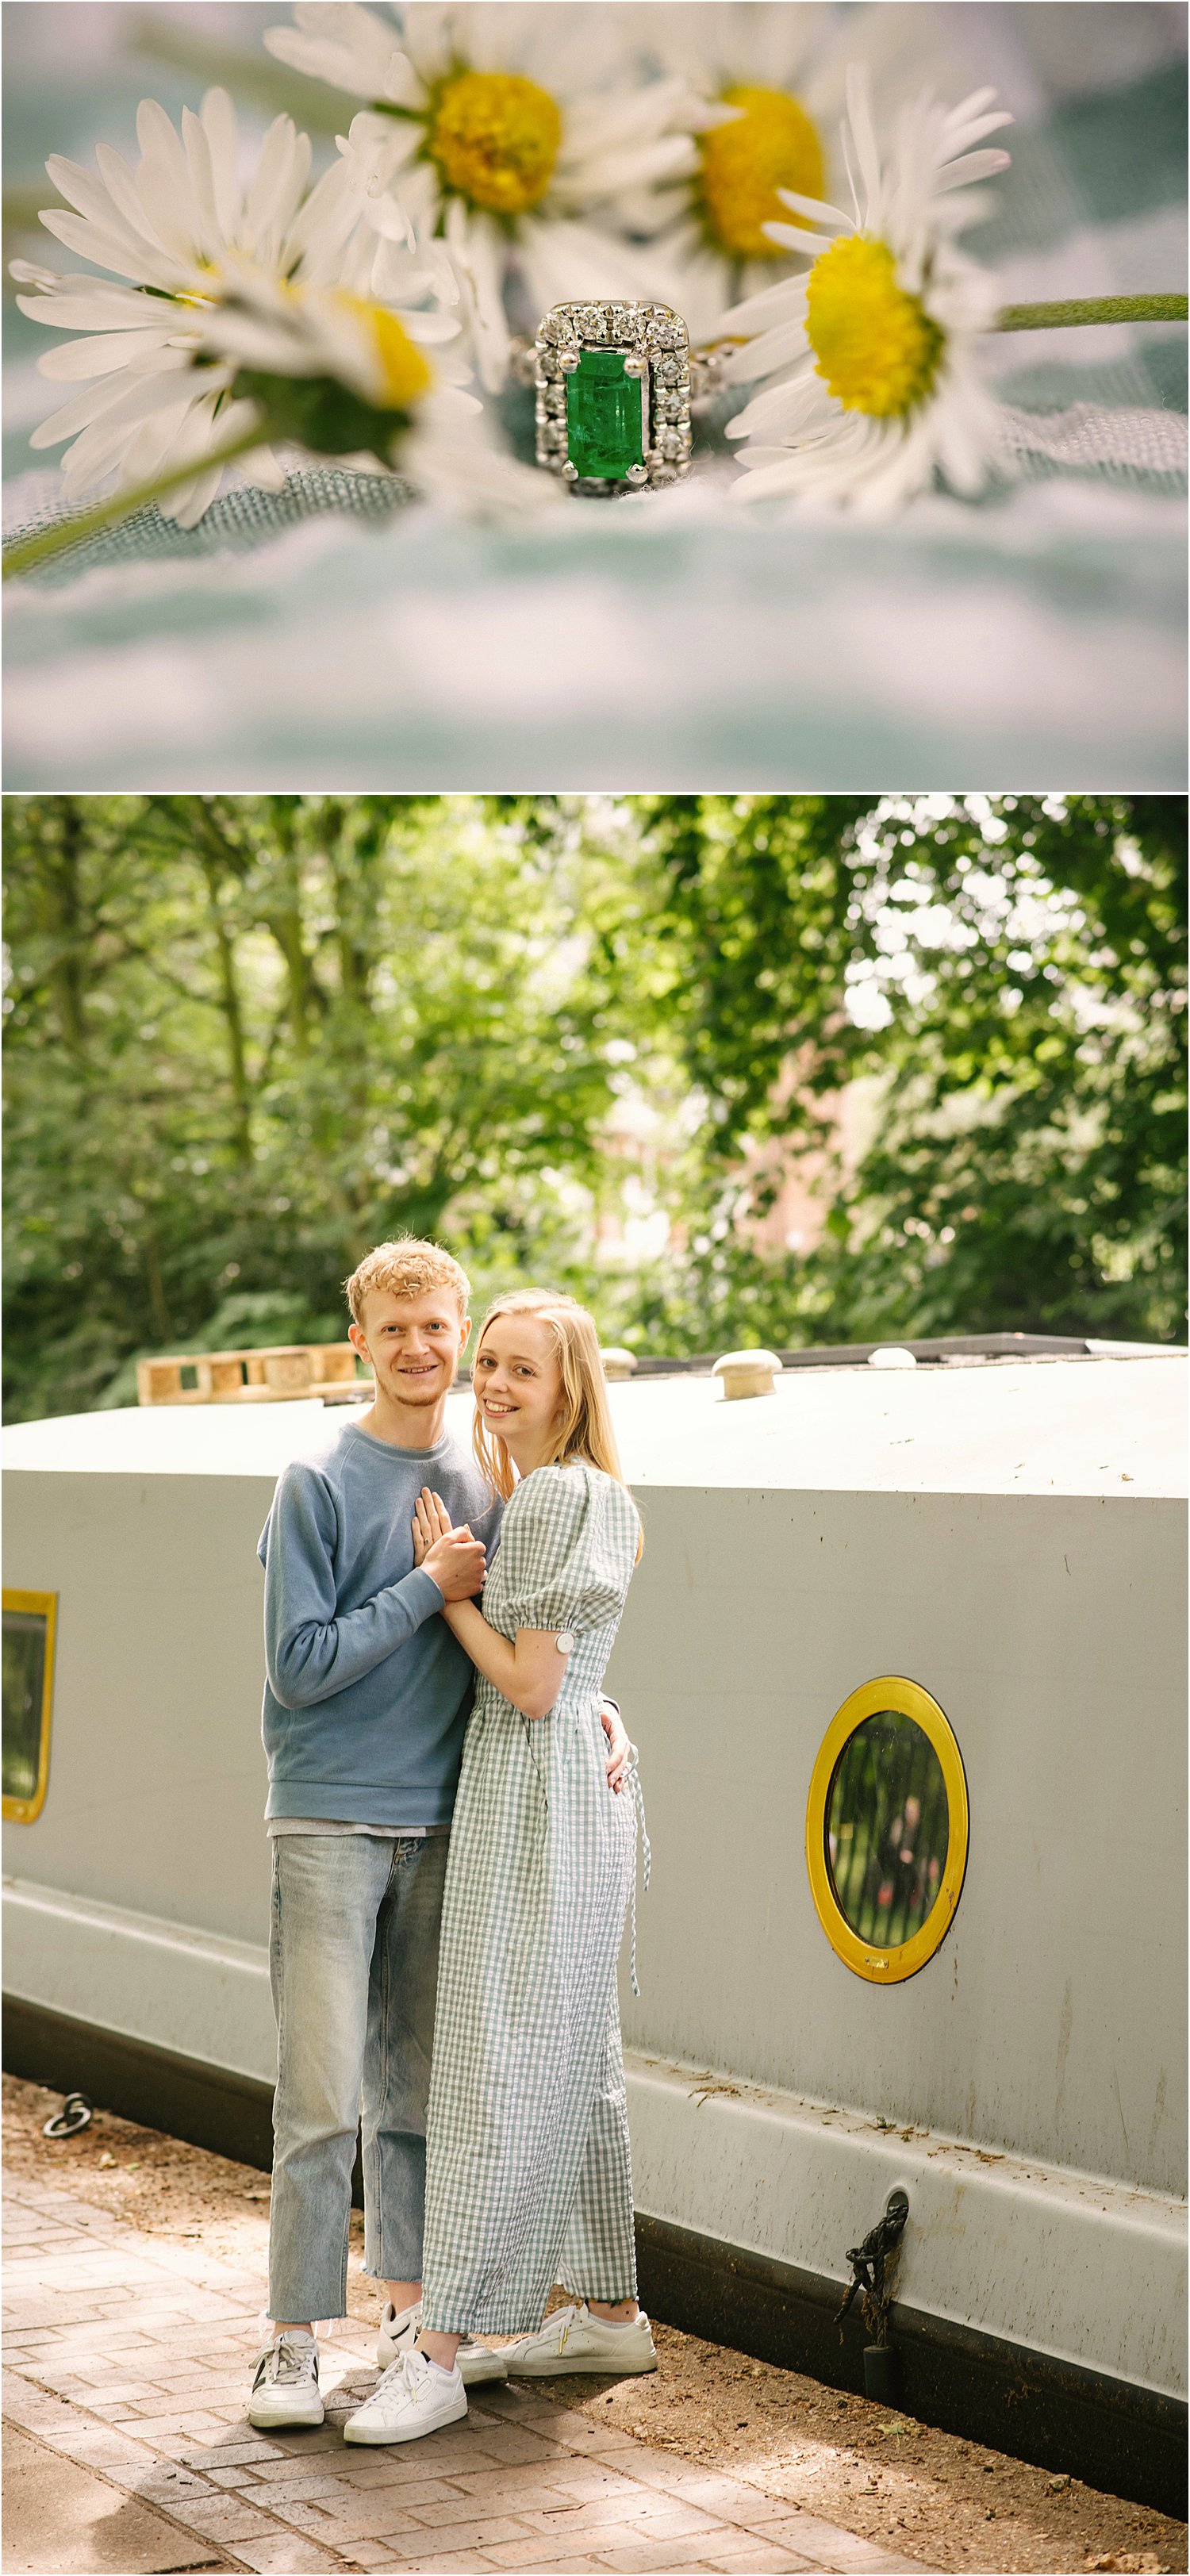 london-victoria-park-engagement-photoshoot-gil-lucy-wedding-lily-sawyer-photo